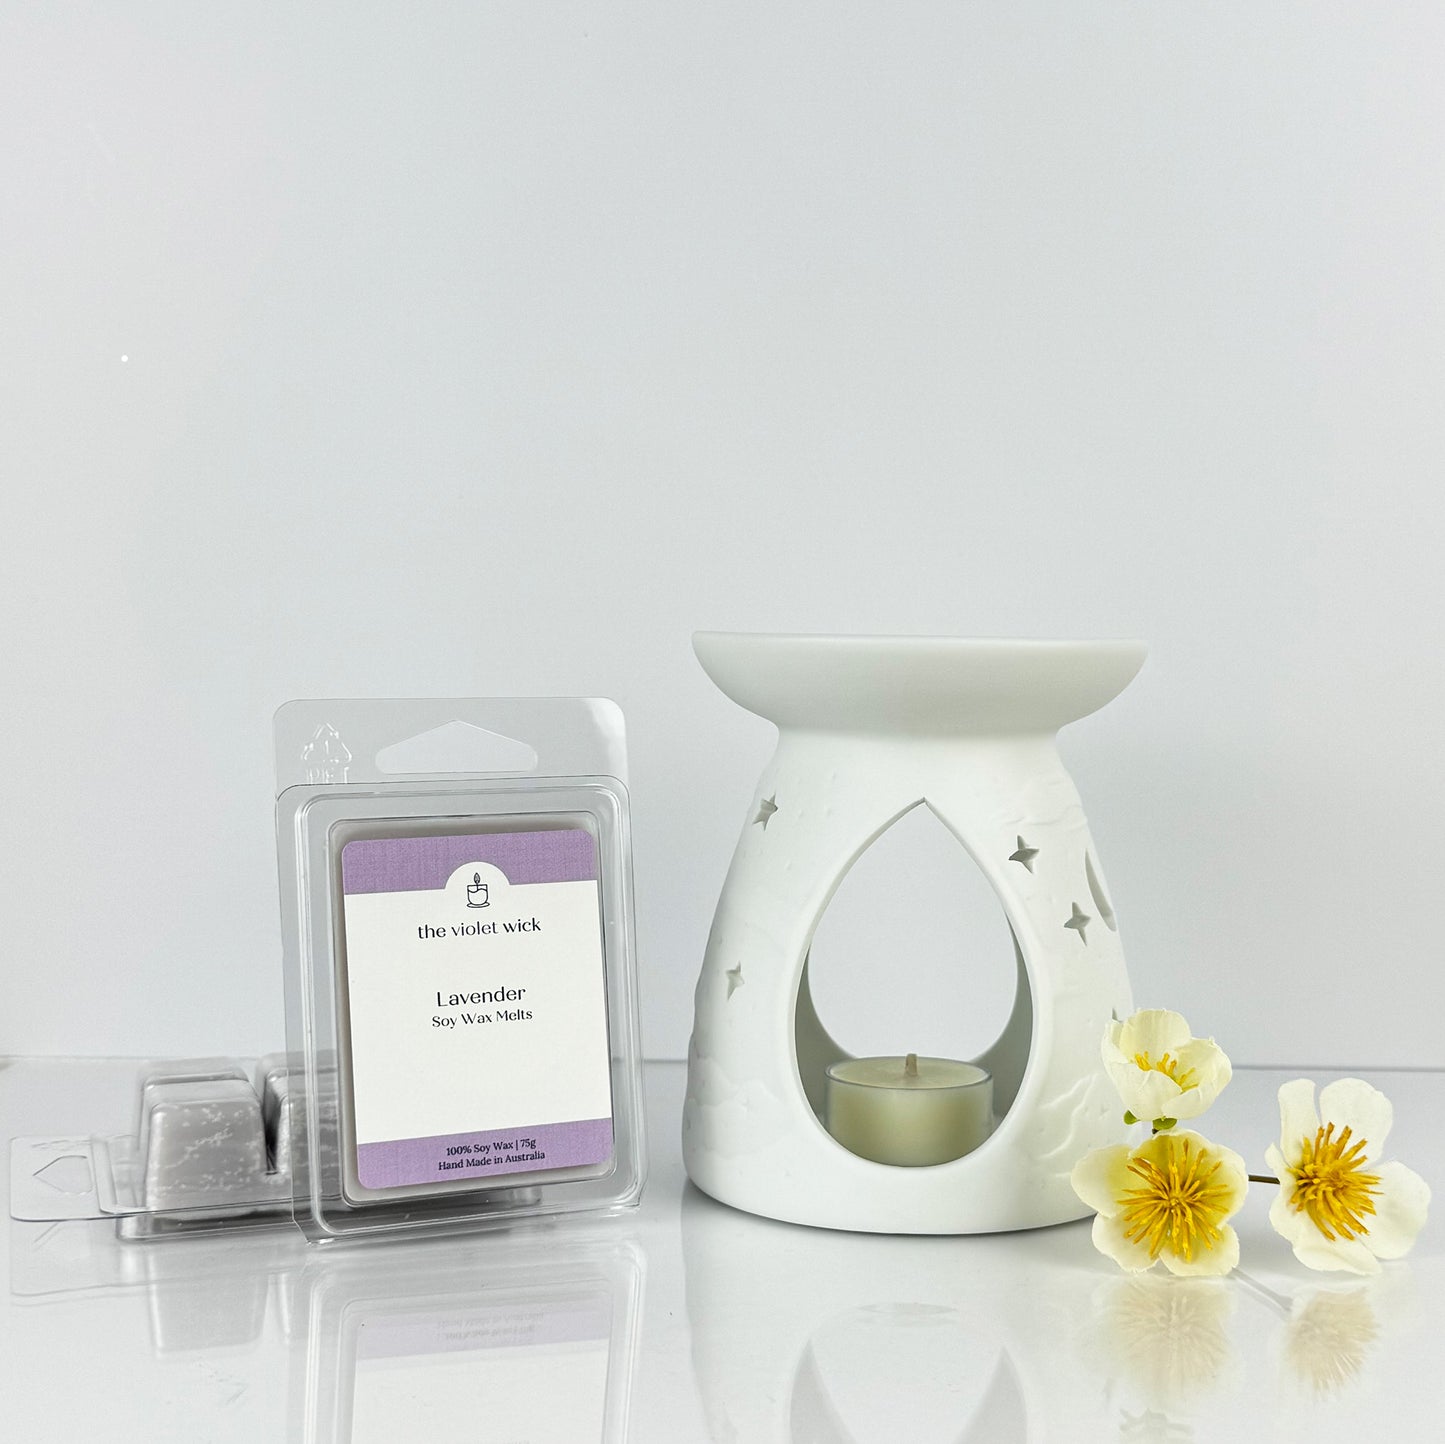 Lavender Soy Wax Melt with Tealight Burner from The Violet Wick